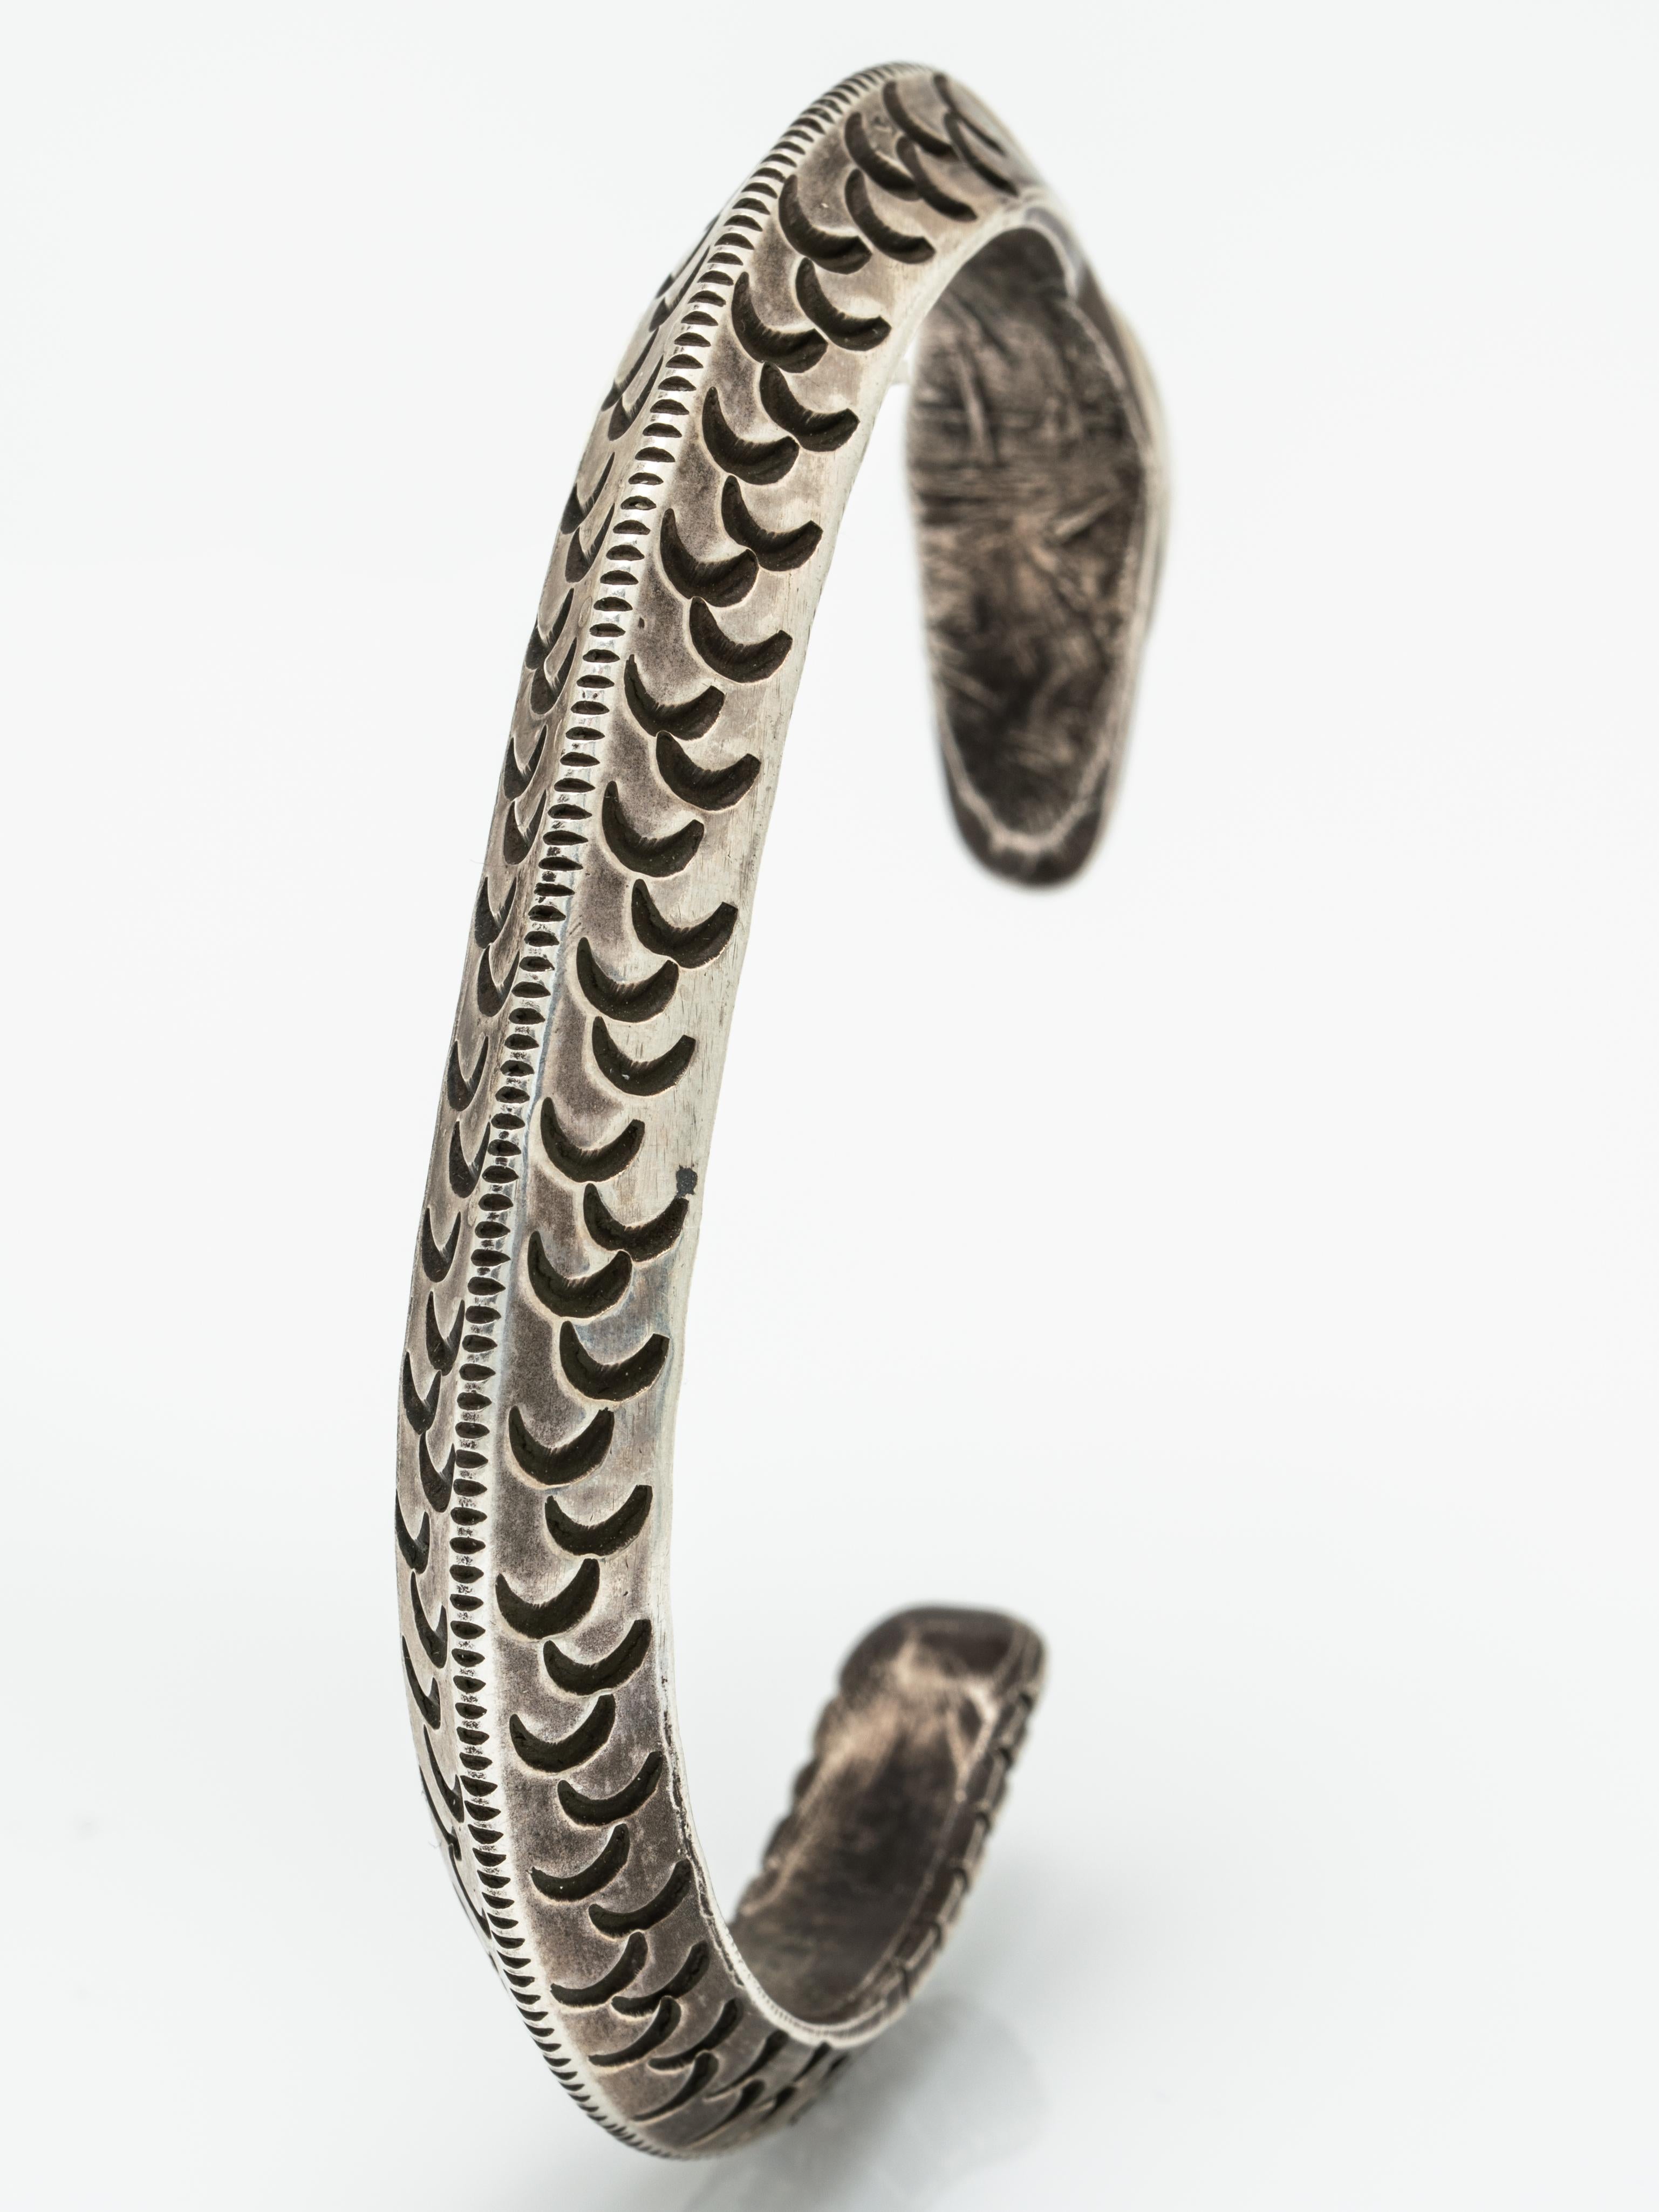 Native American Sterling Silver and Turquoise Navajo Snake Cuff 
Hand Engraved, snake motif.
Please excuse the image of the cuff on and the video - it's too large for me - I have very tiny wrists! This would fit someone with a 6.5-8